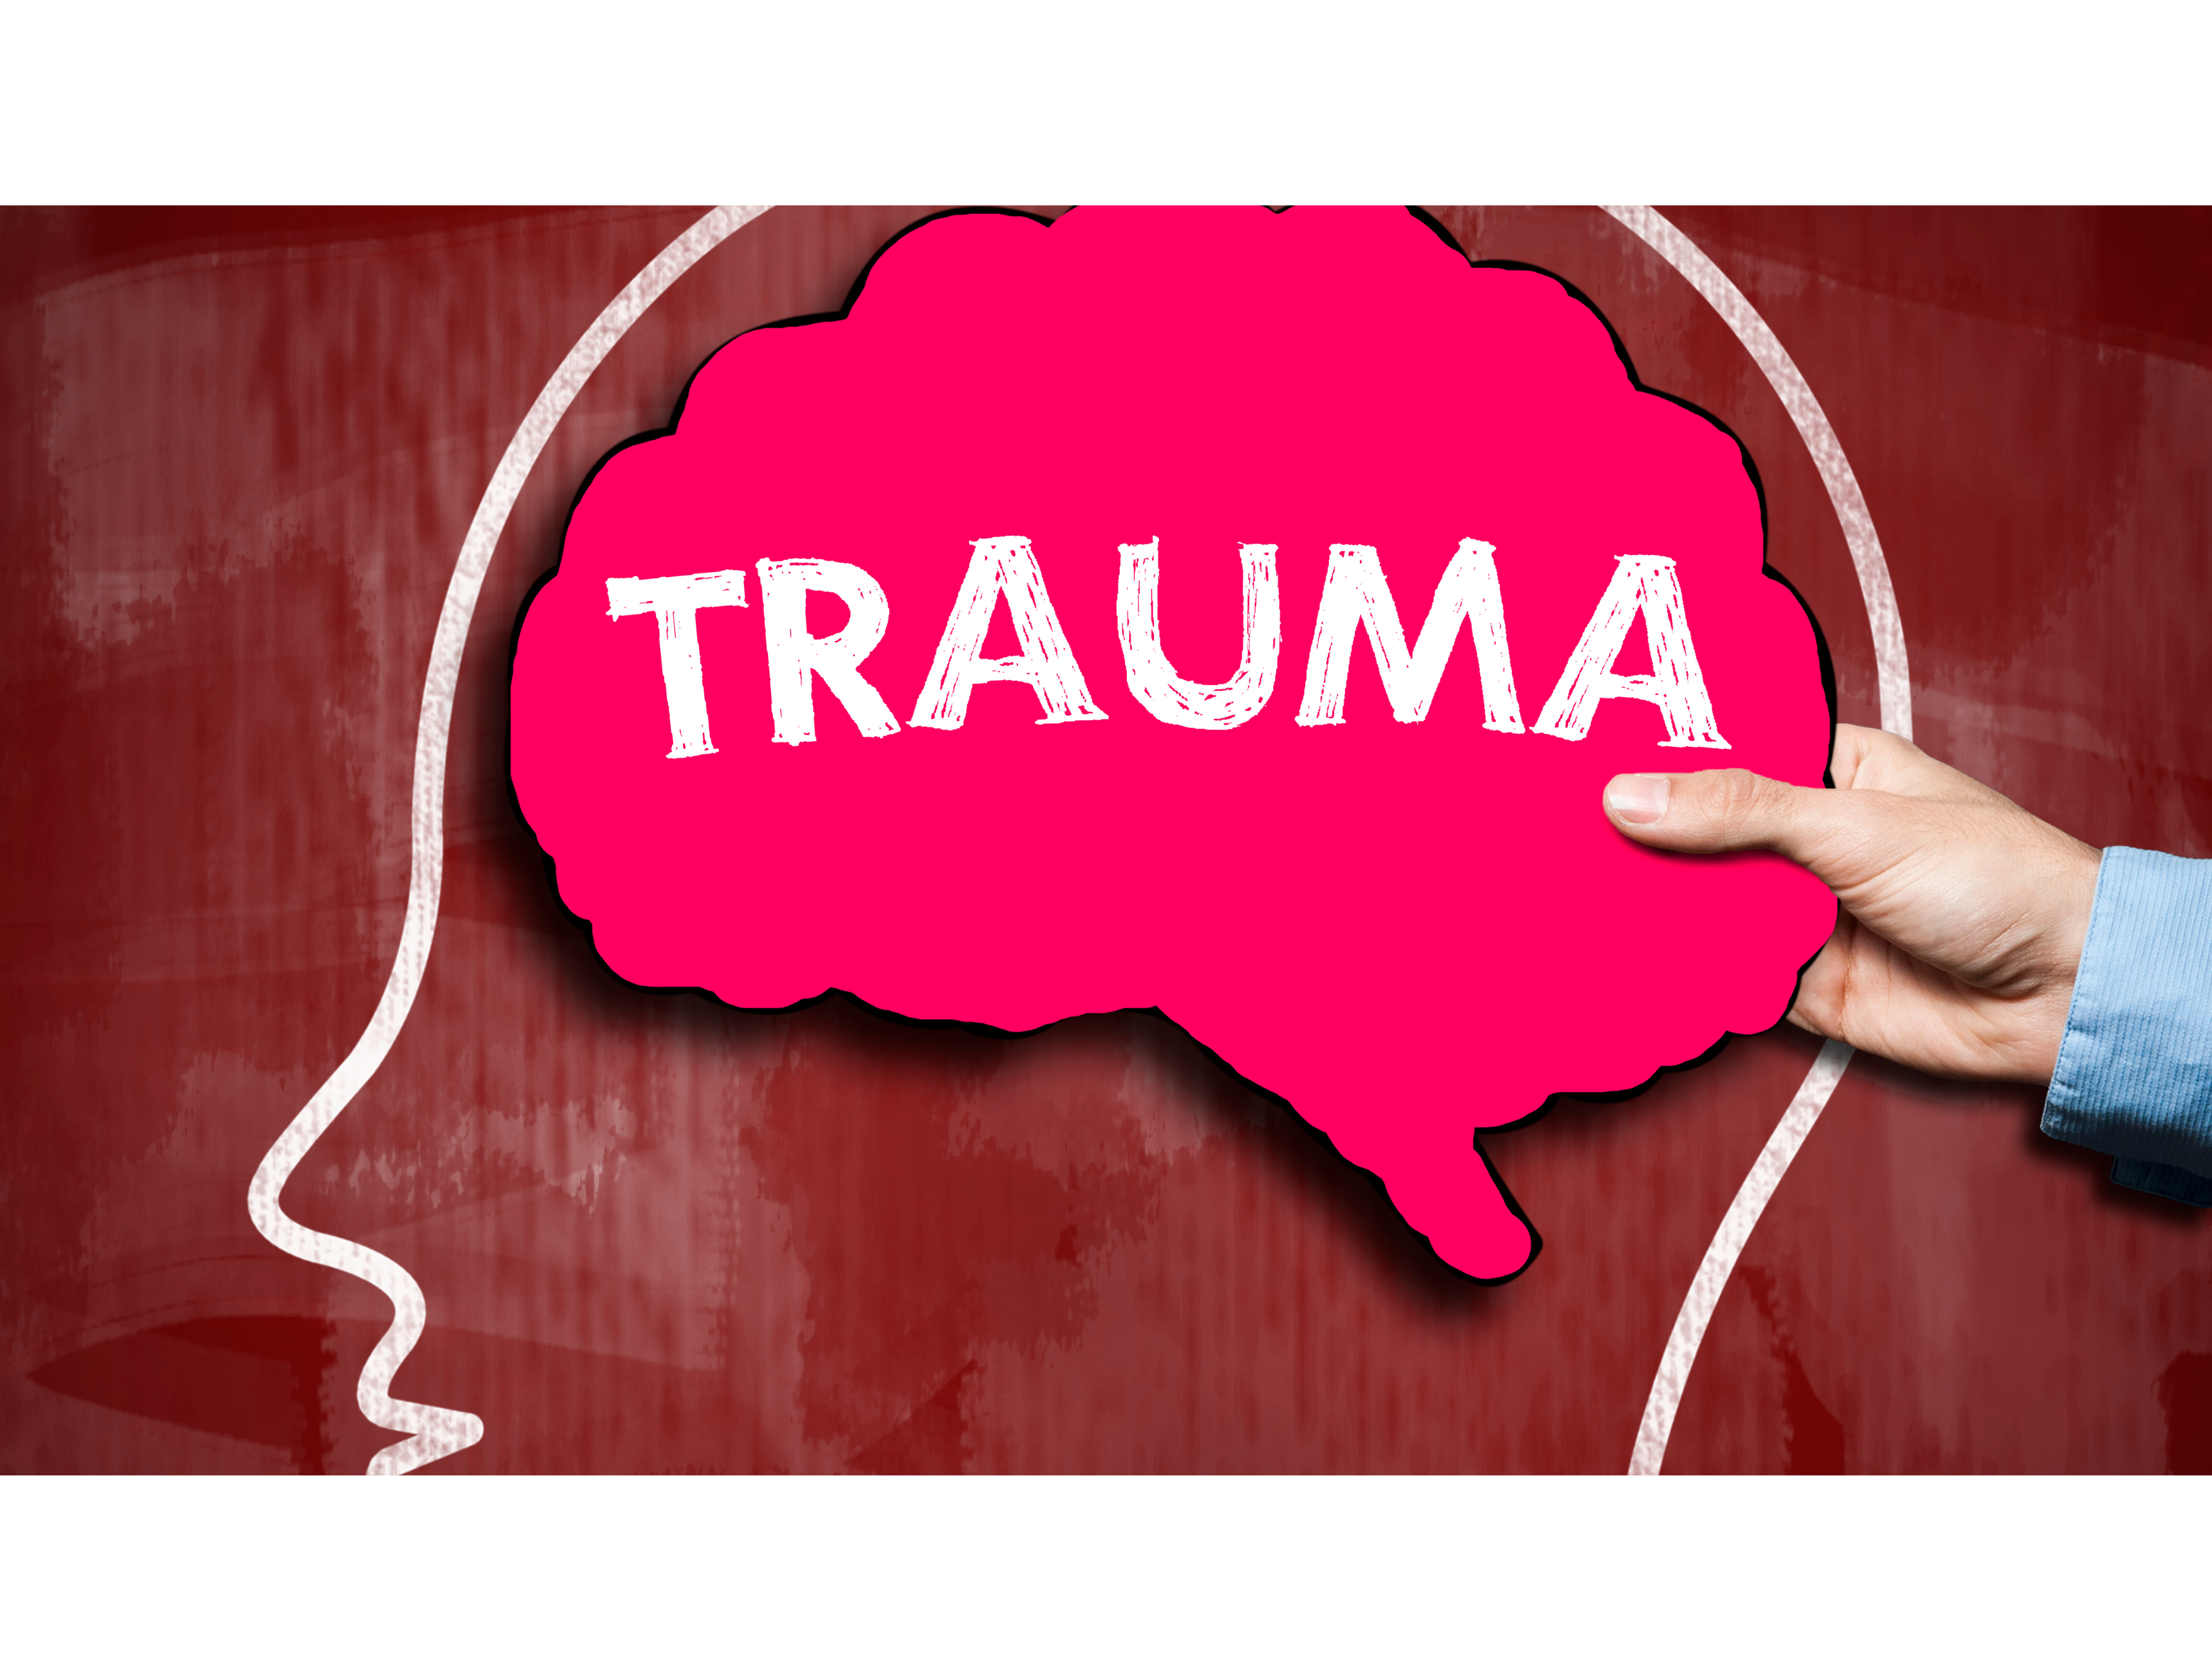 Researchers reveal how trauma changes the brain